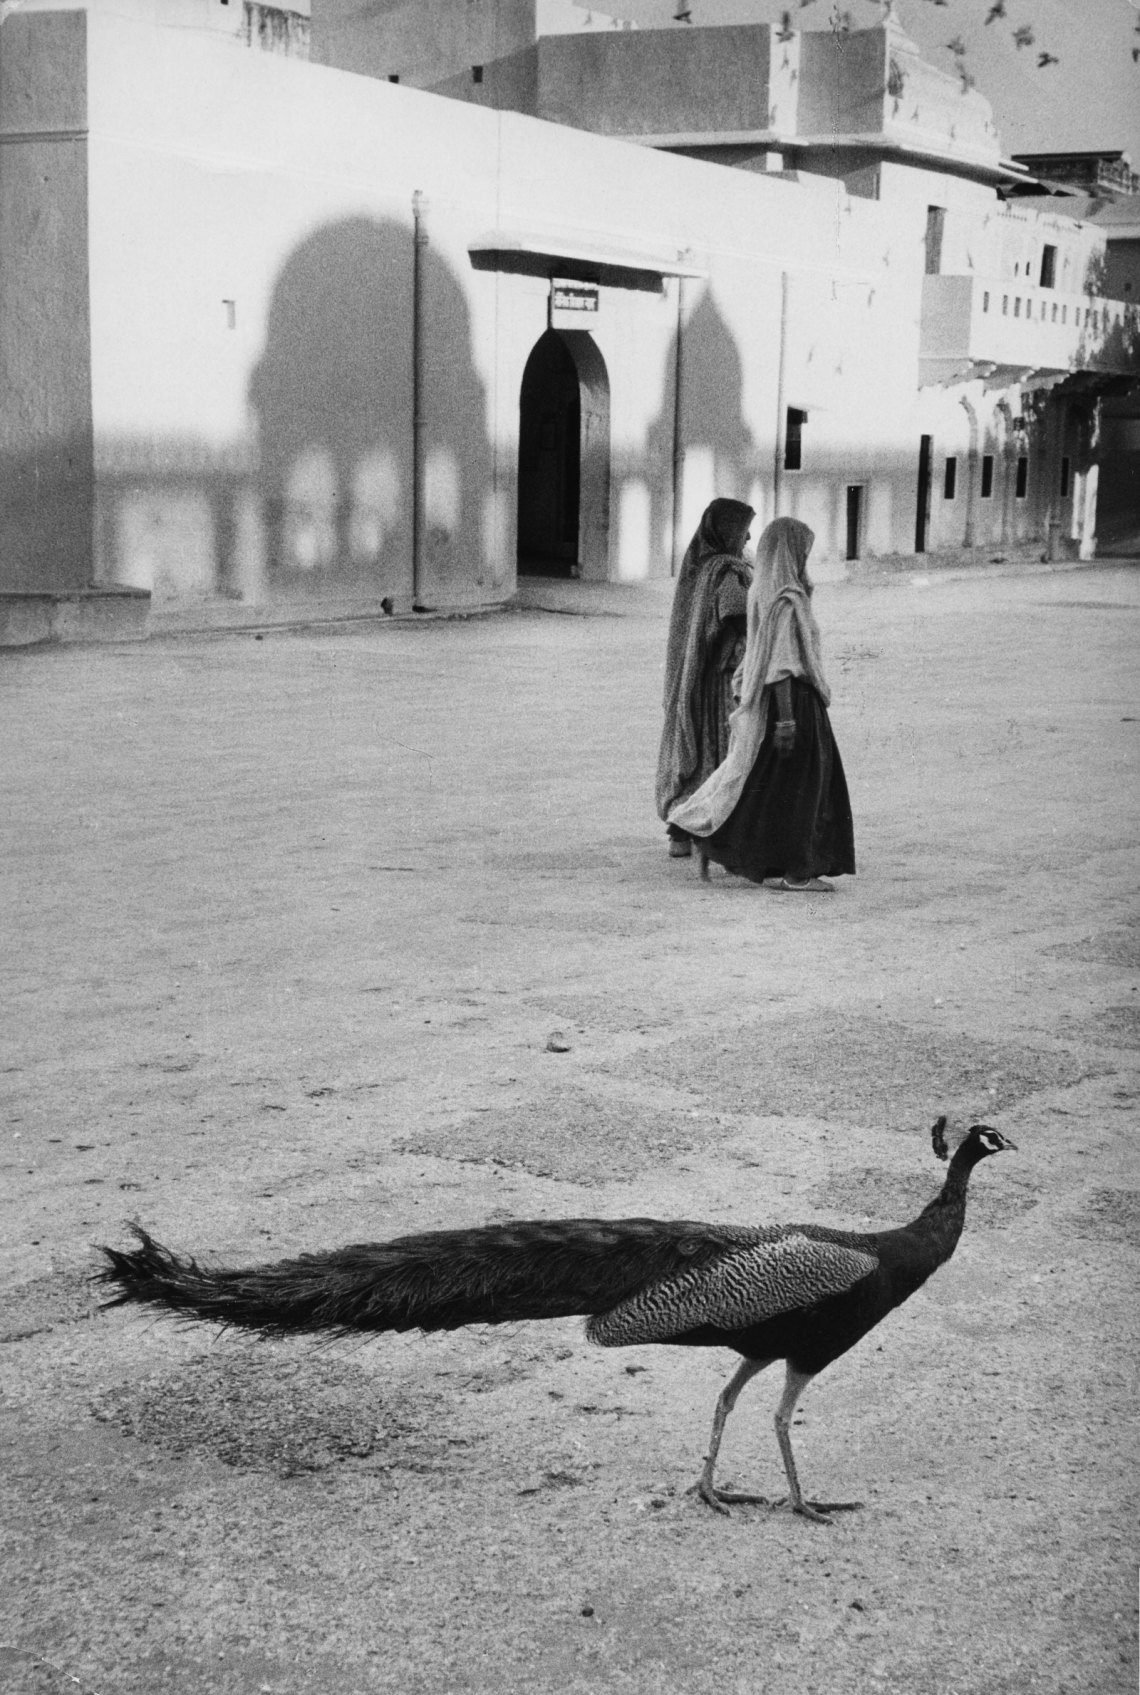 black and white image of a peacock, with two women and the shadows of buildings behind it